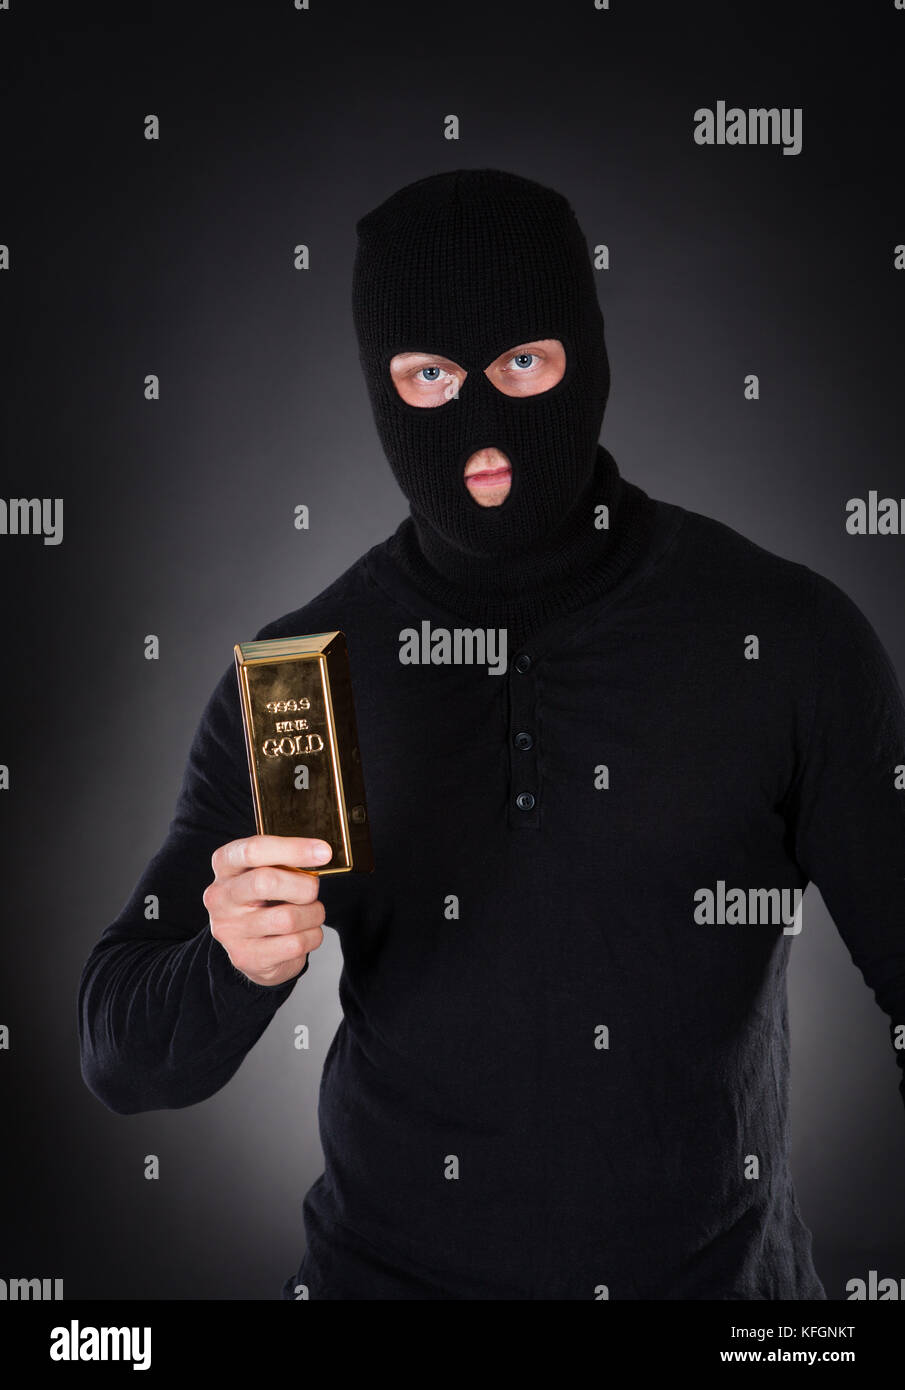 Robber disguised in a black balaclava holding a gold bullion bar as he makes his getaway from a heist with the loot through the darkness Stock Photo